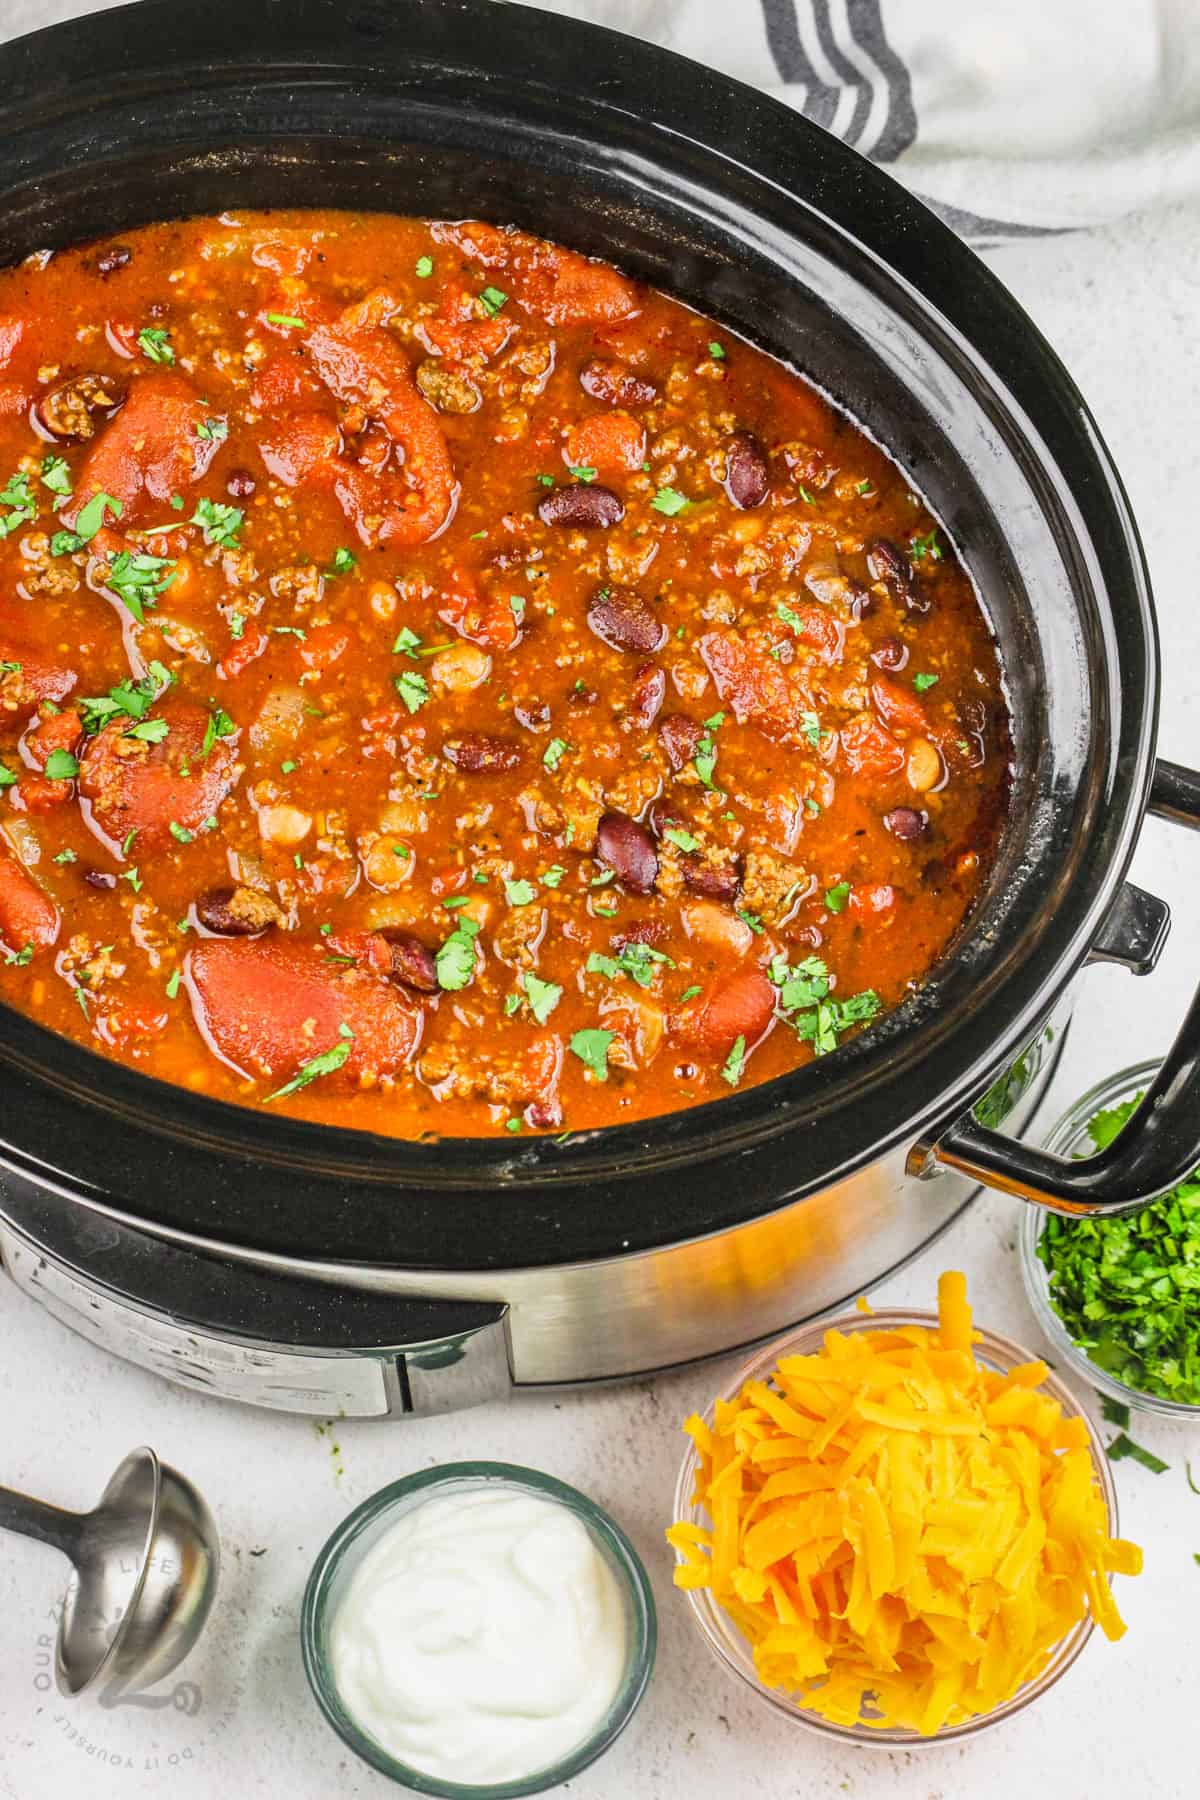 Crockpot Chili Slow Cooker Chili cooked in the pot with ingredients to garnish in bowls